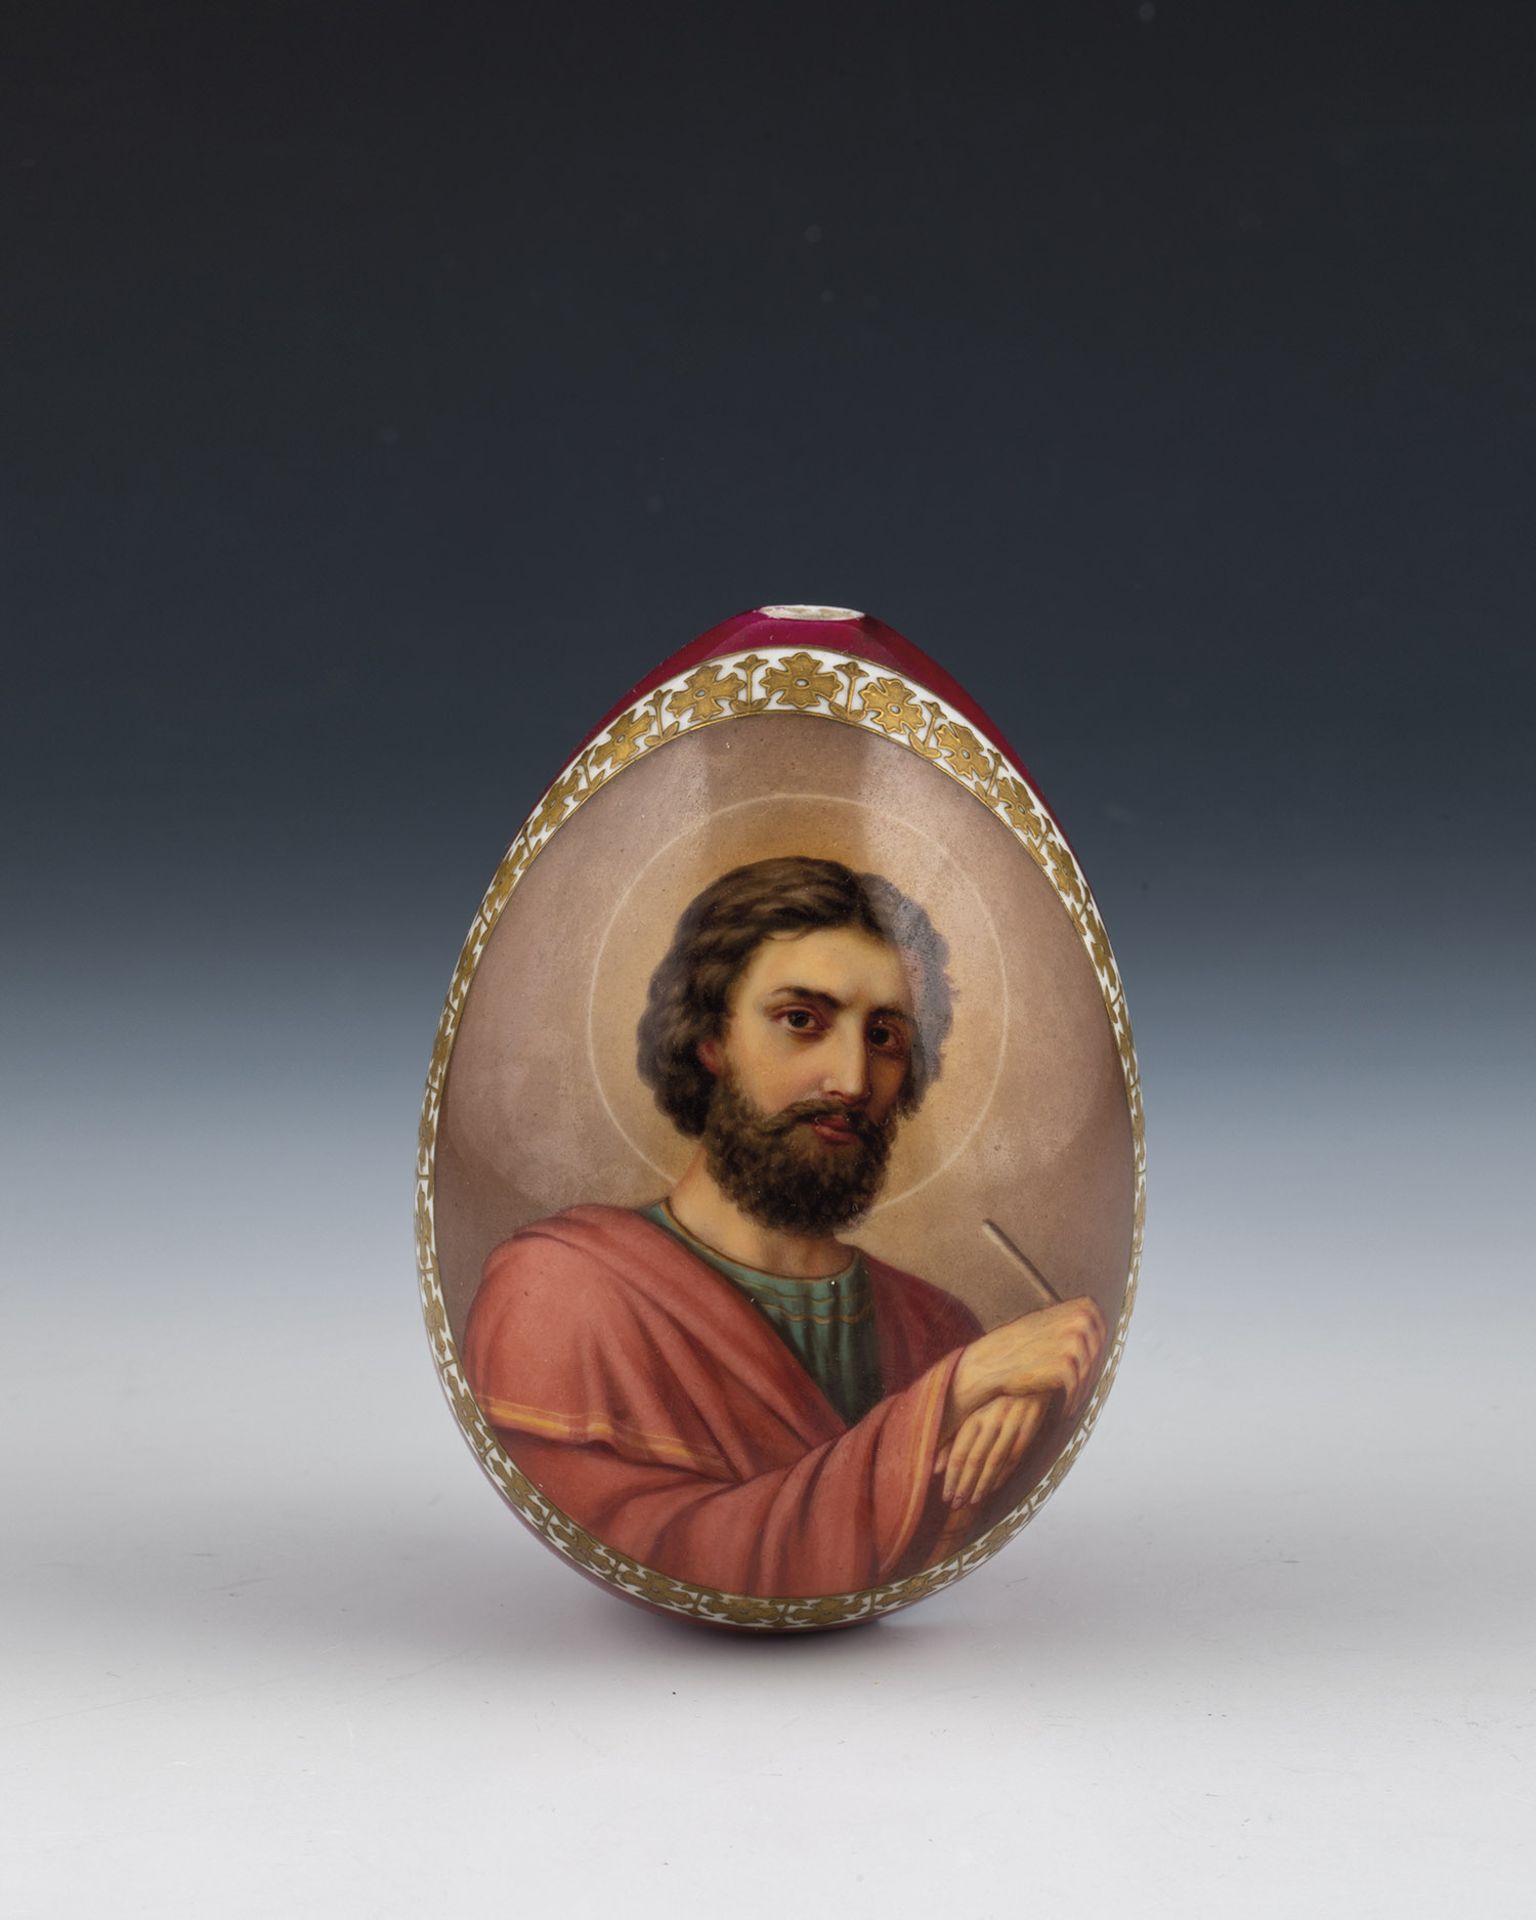 Porcelain egg with St. Luke Wohl Imperial Porcelain Manufactory, last quarter of the 19th century, A